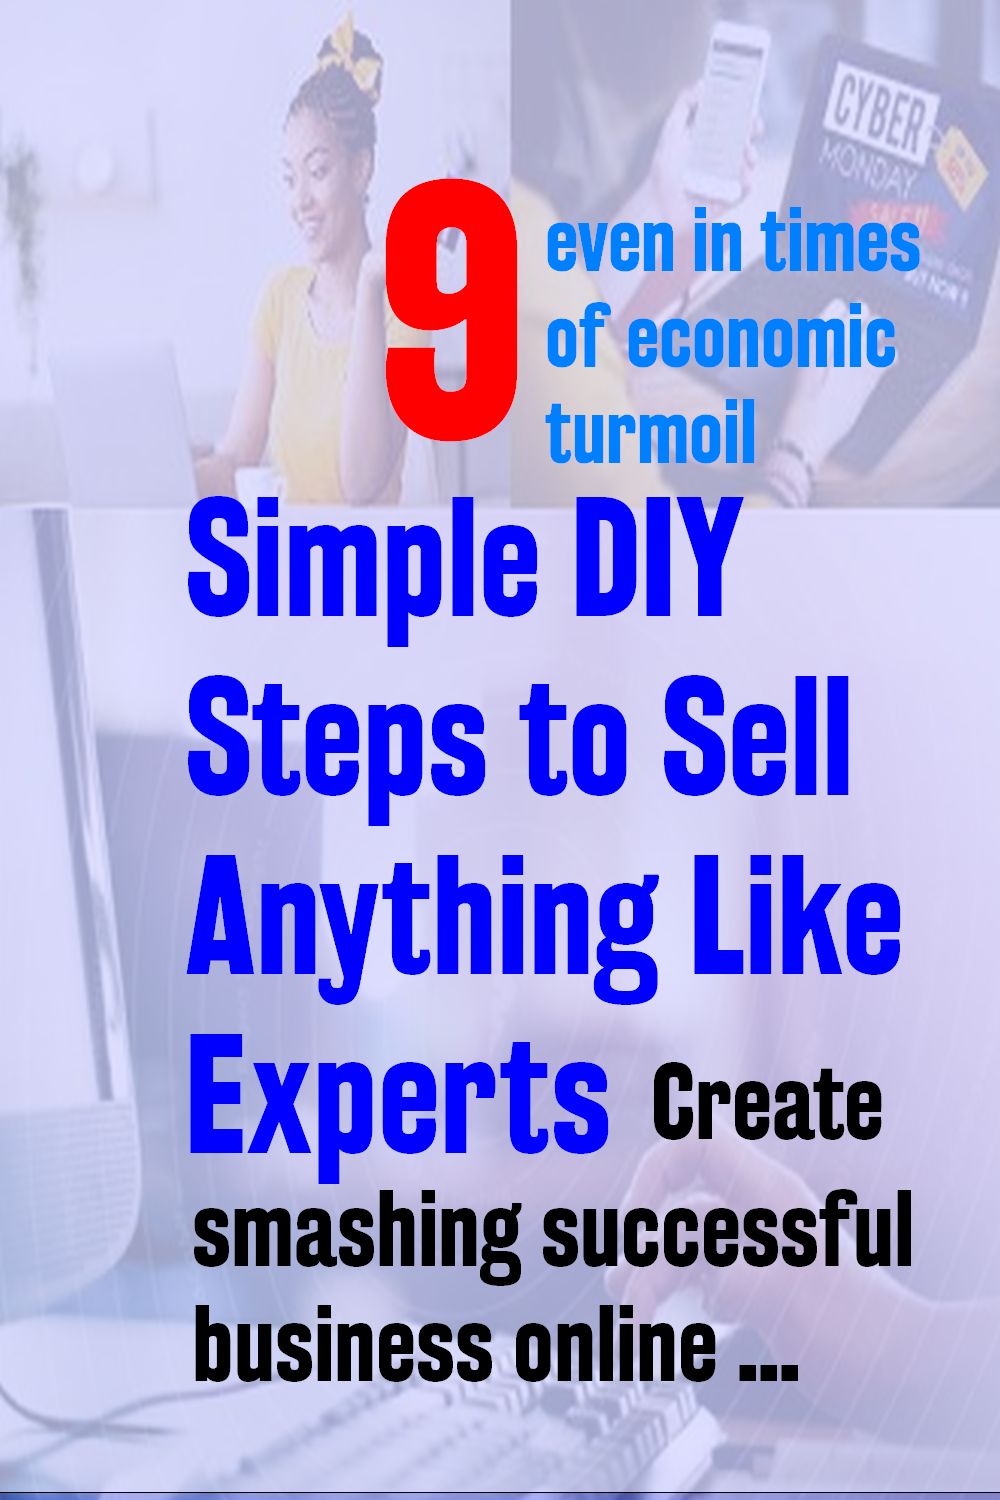 Simple 9 DIY Steps to create smashing successful business online even in times of economic turmoil